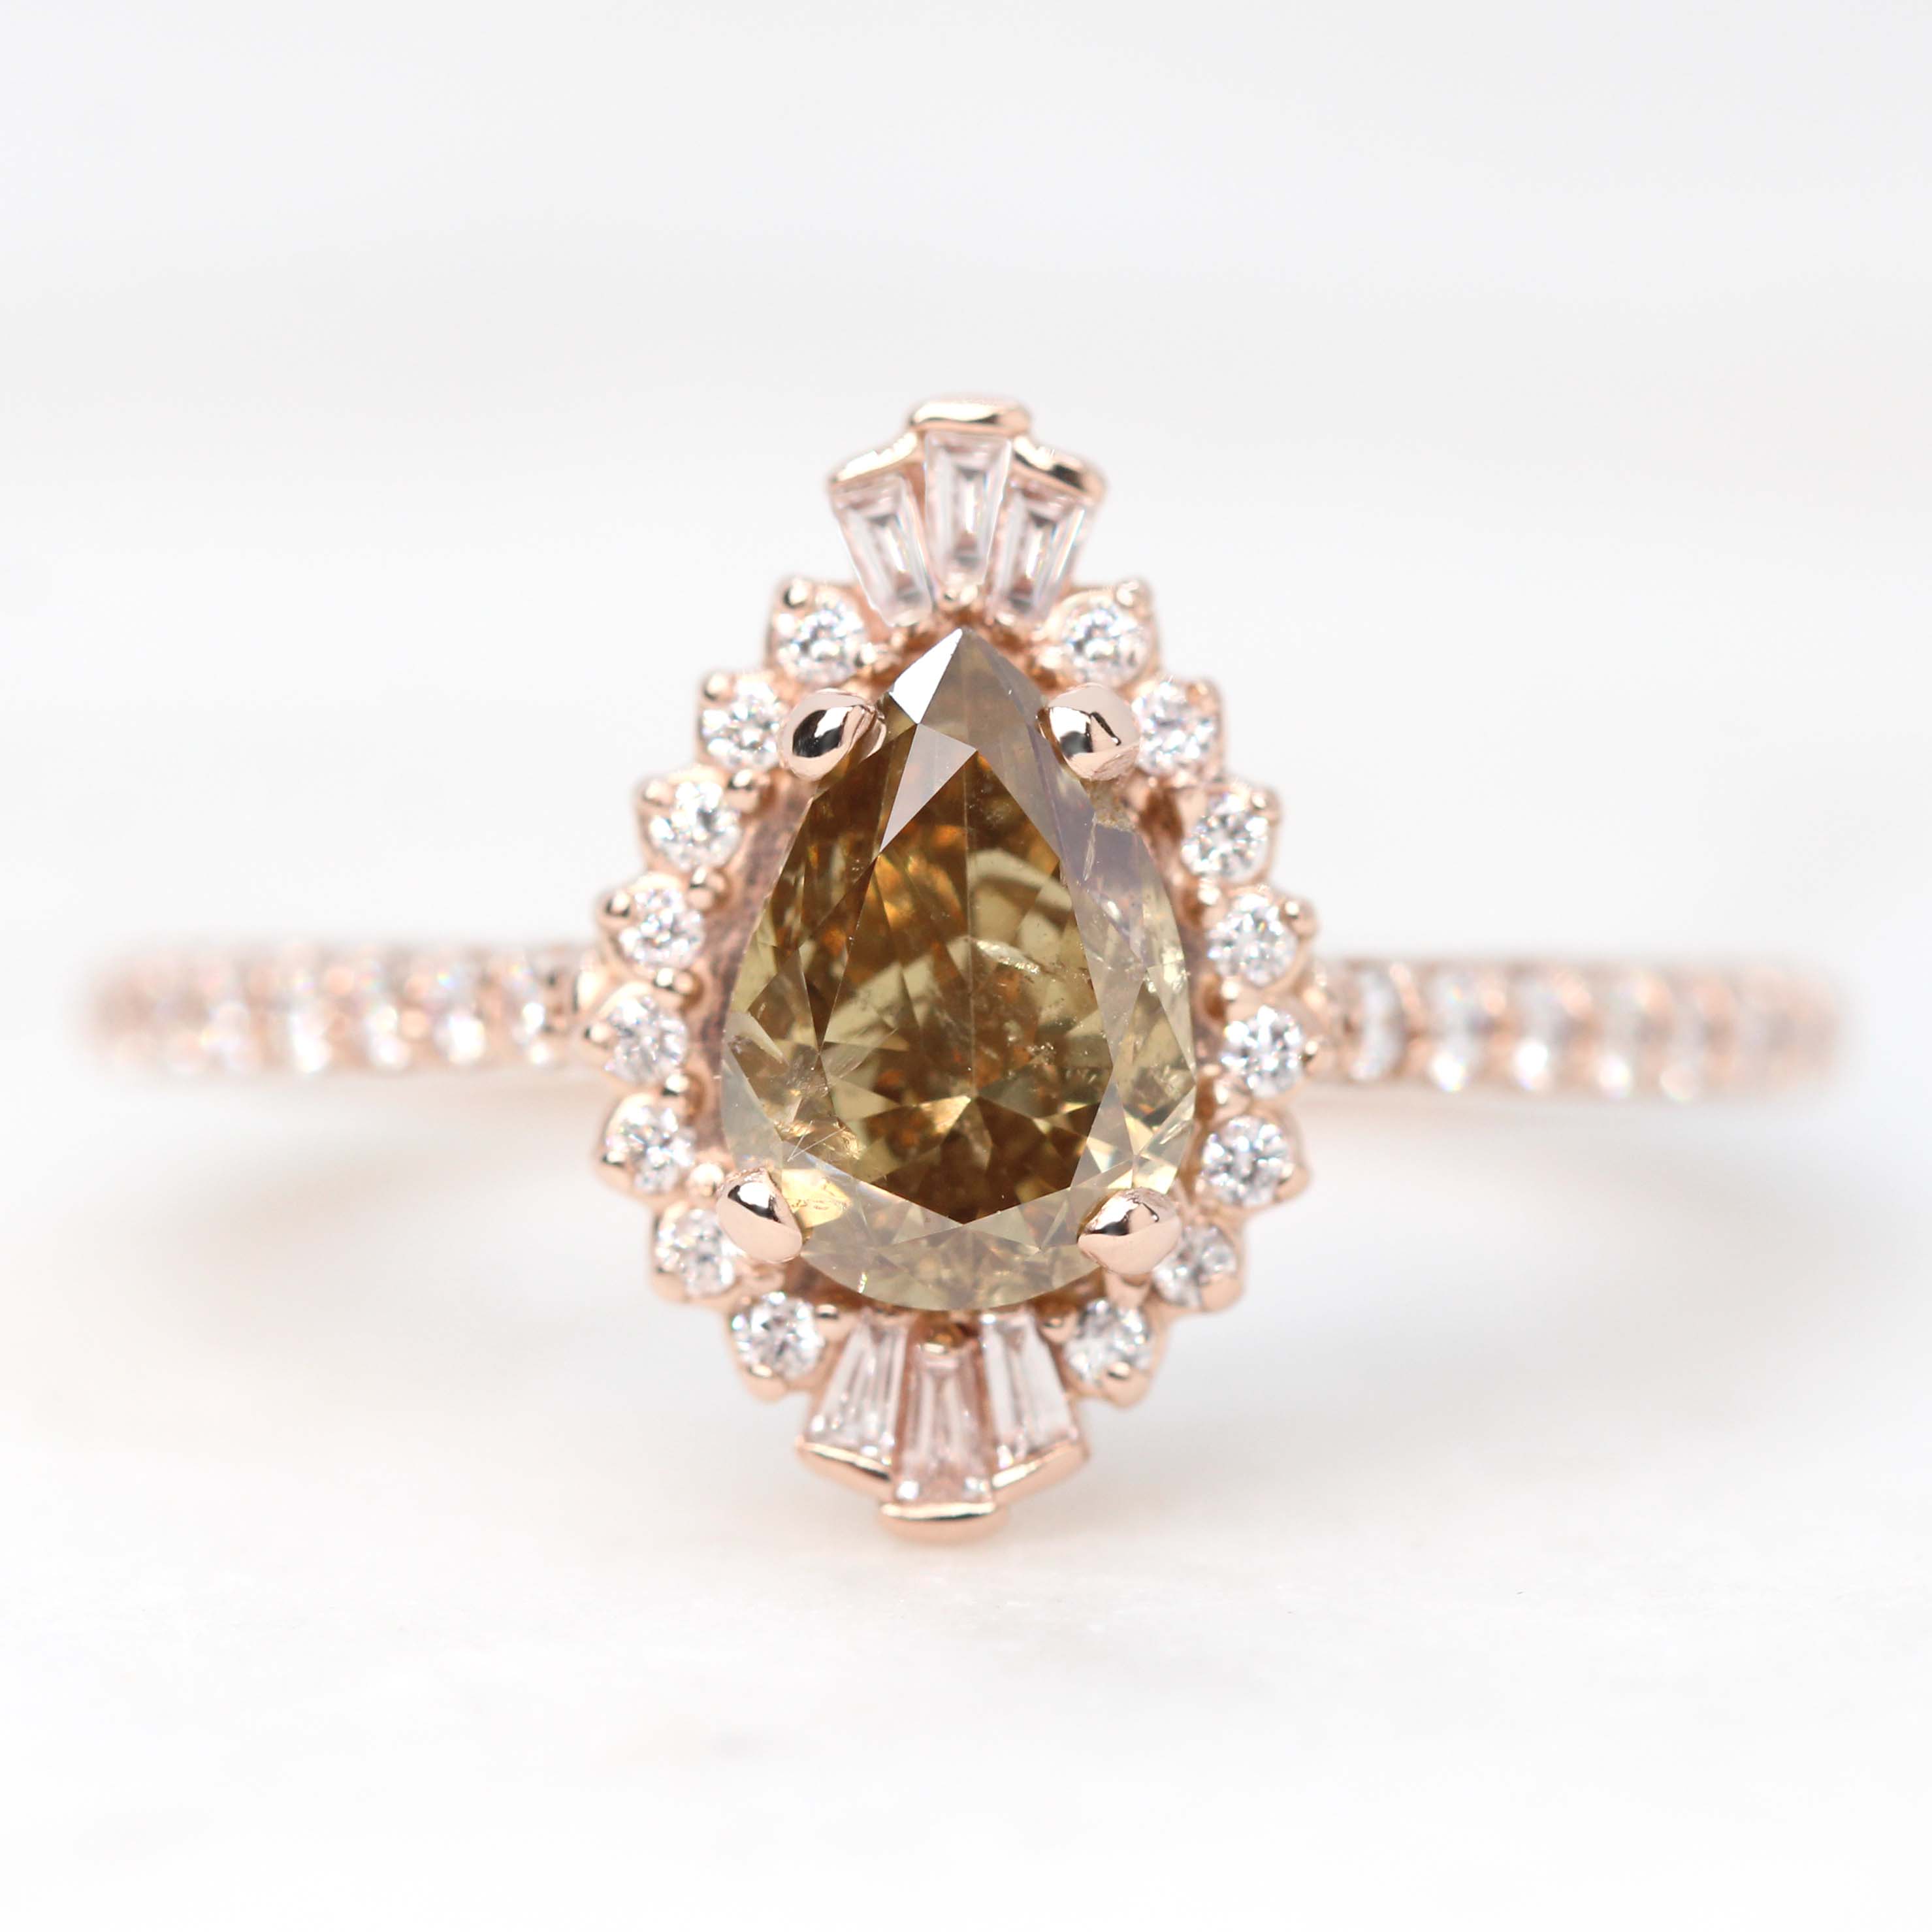 Tinsley Ring with a 1.01 Carat Pear Champagne Salt and Pepper Diamond and  White Accent Diamonds in 14k Rose Gold - Ready to Size and Ship